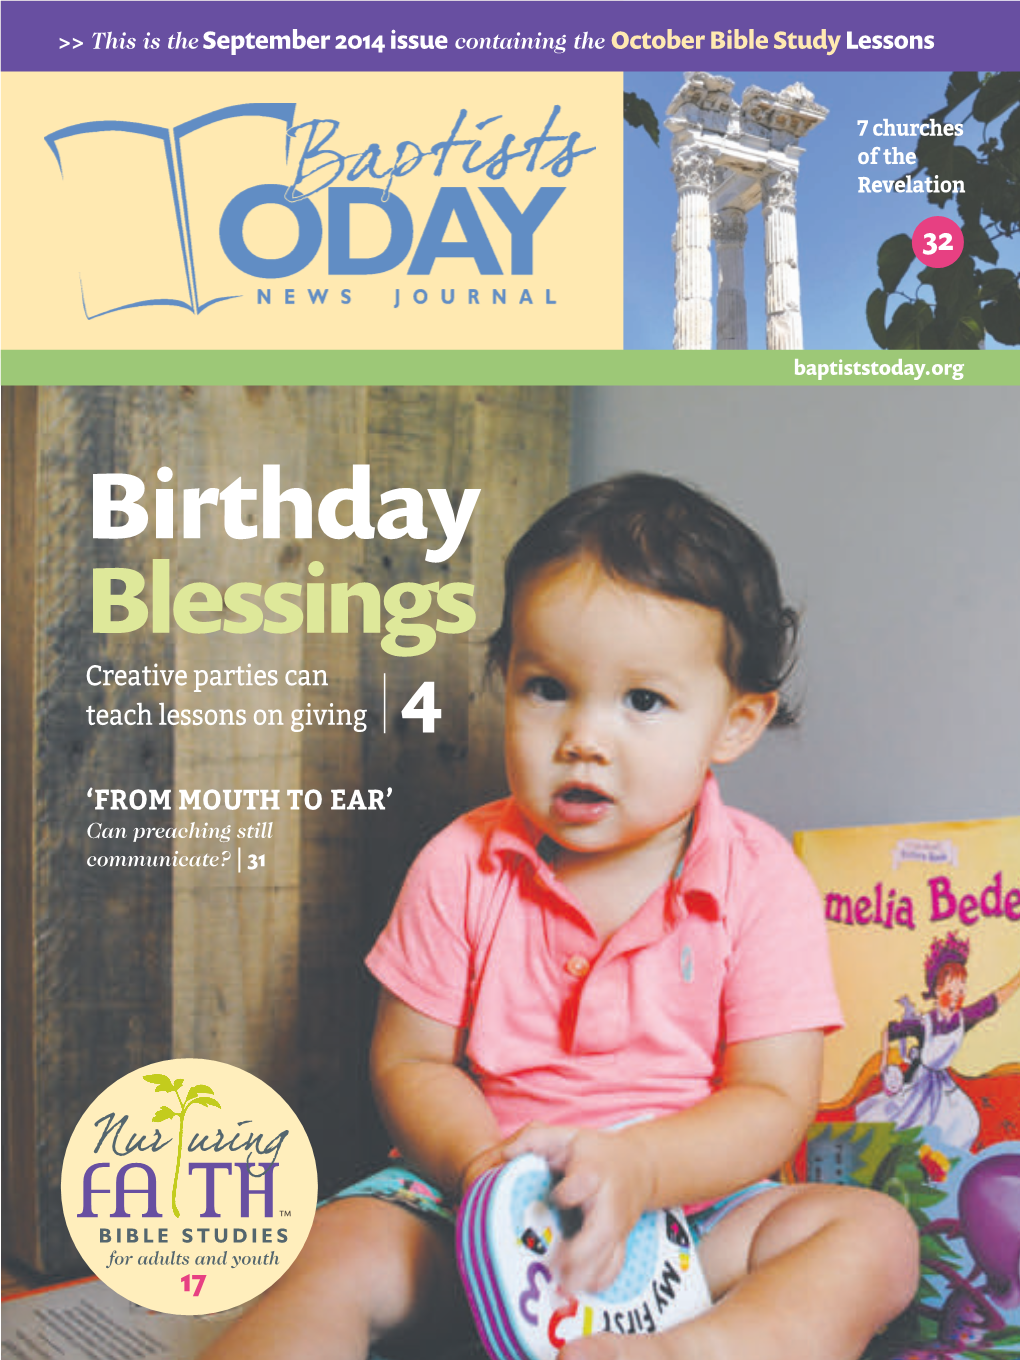 Birthday Blessings Creative Parties Can Teach Lessons on Giving 4